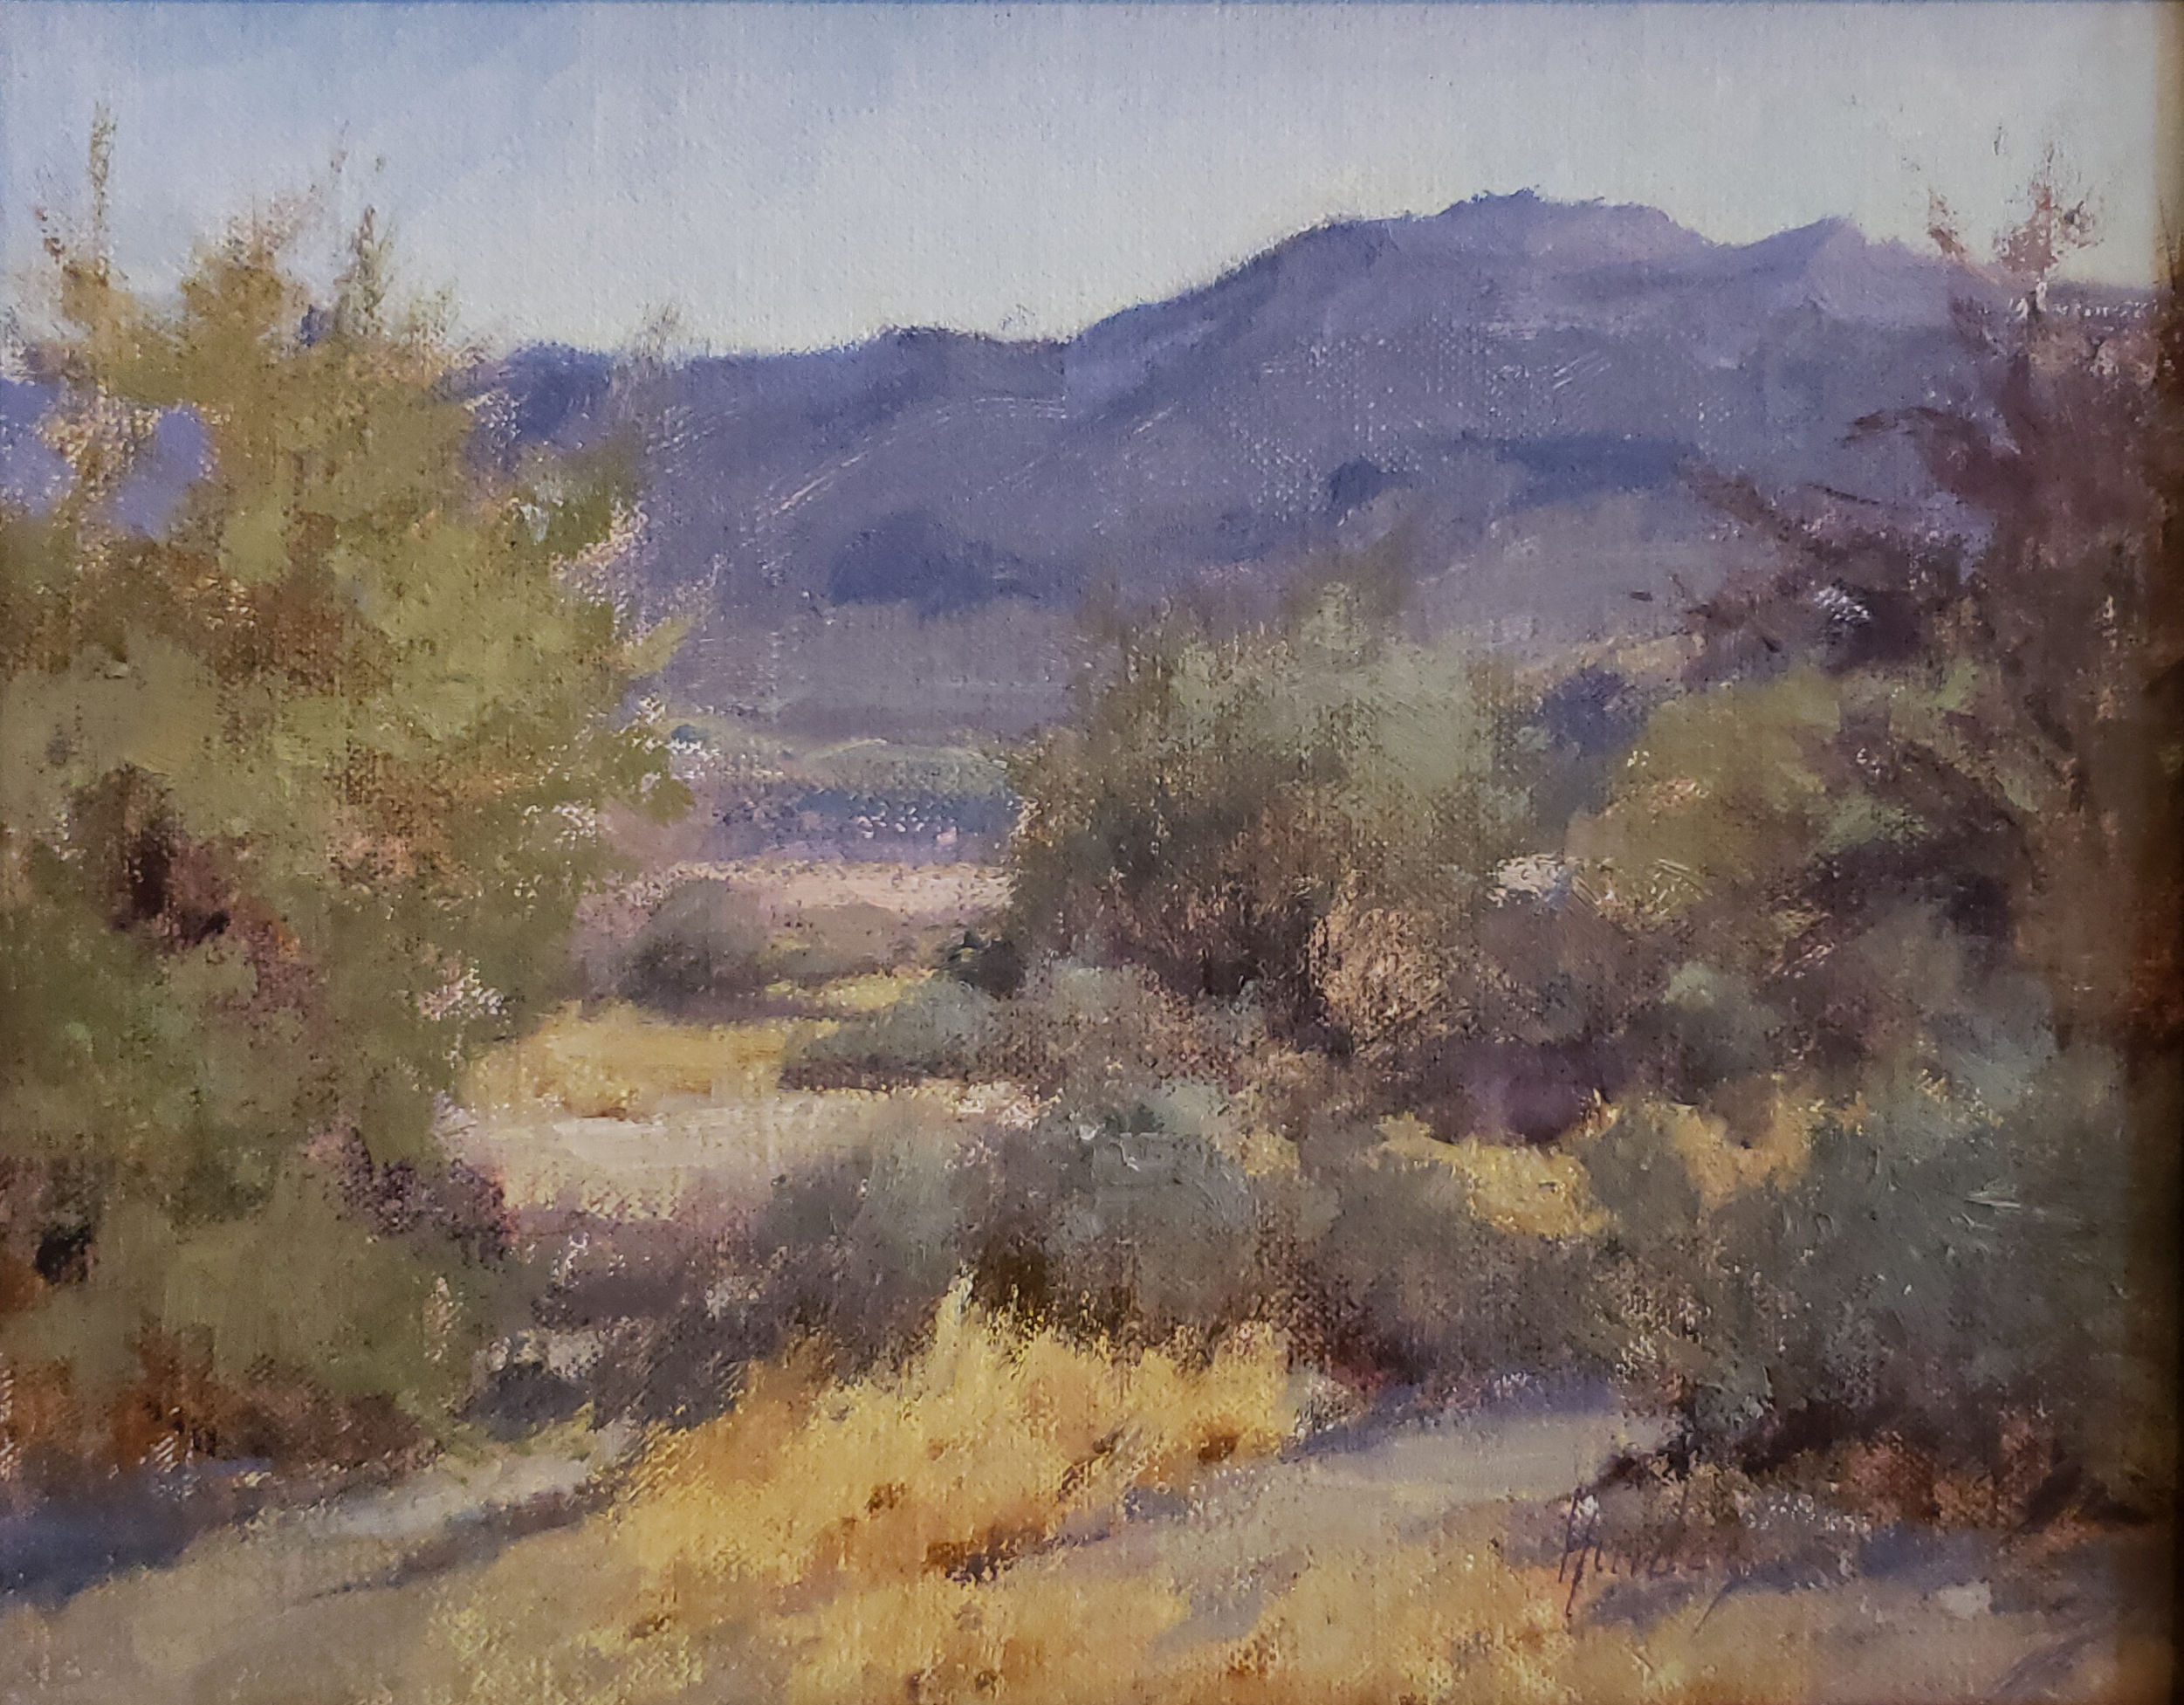 Easter in Sedona Art Piece available at Hindes Fine Art Gallery